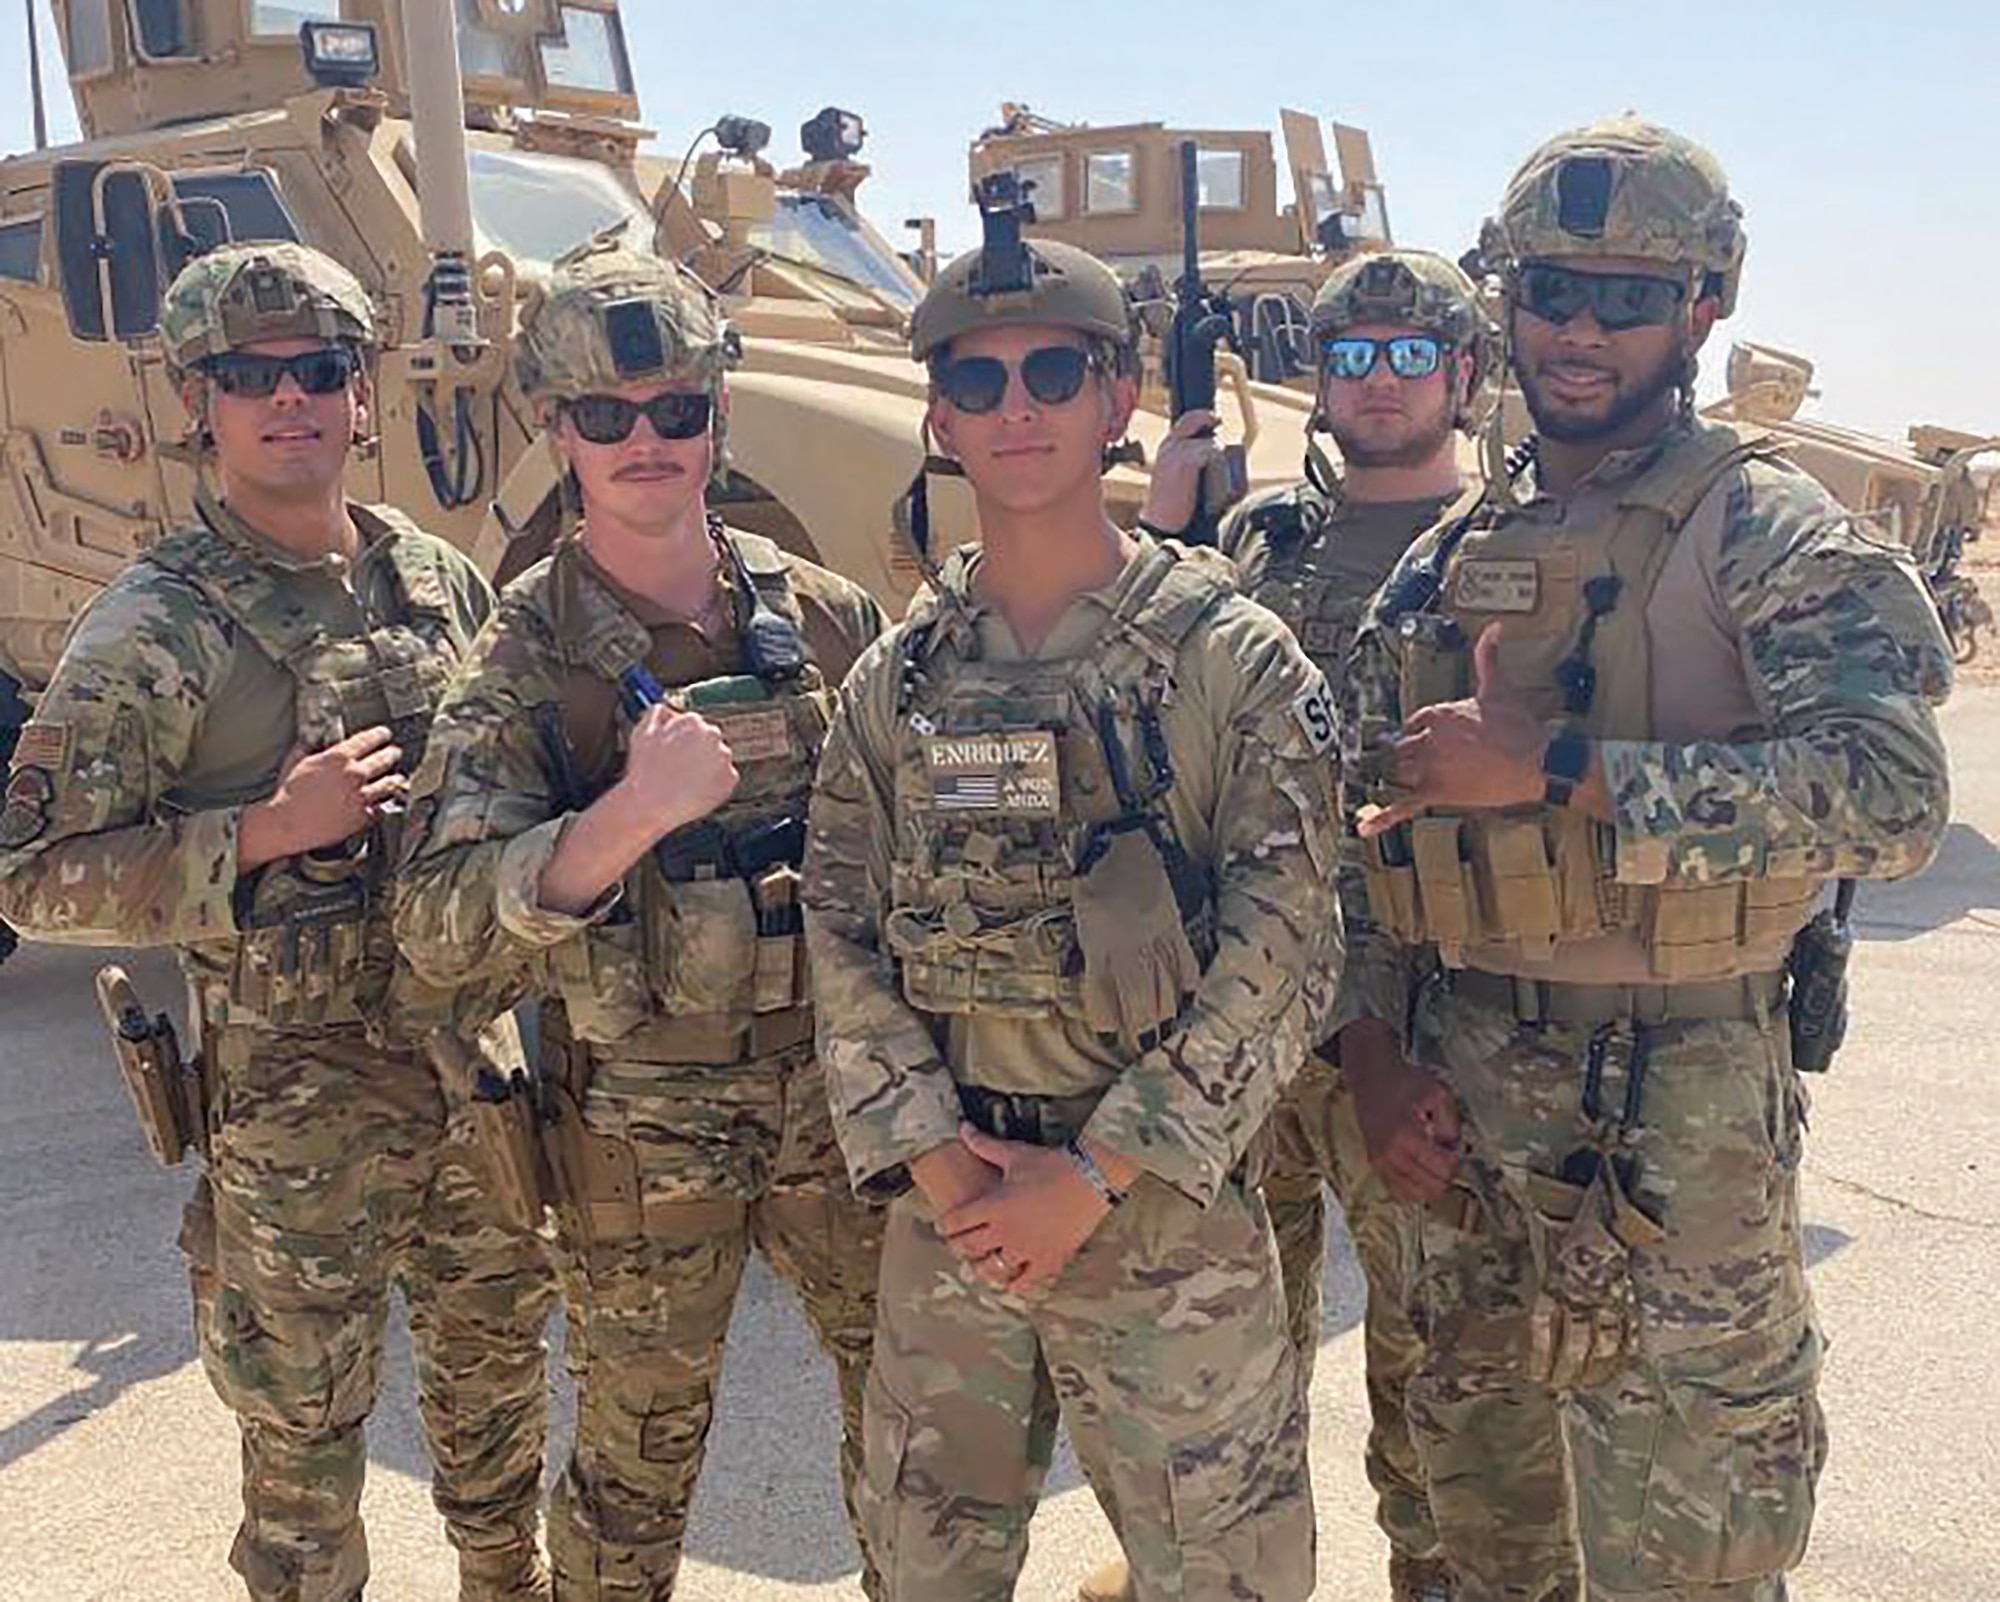 Staff Sgt. Brandon Walker, second from left, 445th Security Forces Squadron, poses for a photo with fellow defenders at Prince Sultan AB Saudi Arabia last year. SFS Airmen are responsible for defending air bases around the globe, law enforcement on those bases, missile security, combat arms and handling military working dogs.